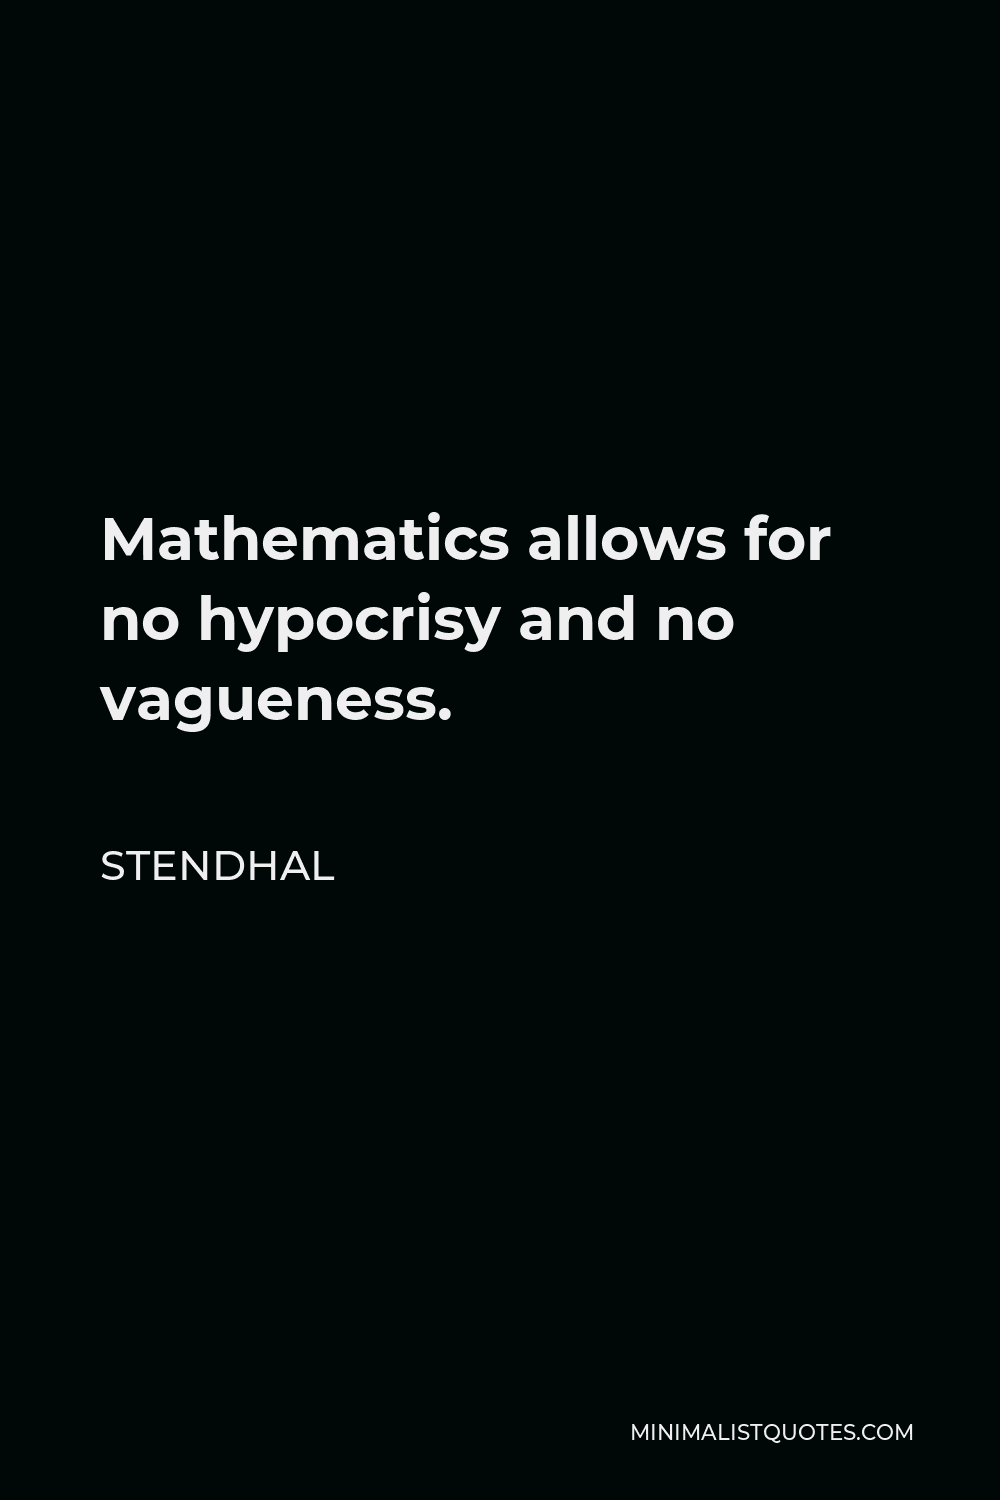 Stendhal Quote - Mathematics allows for no hypocrisy and no vagueness.